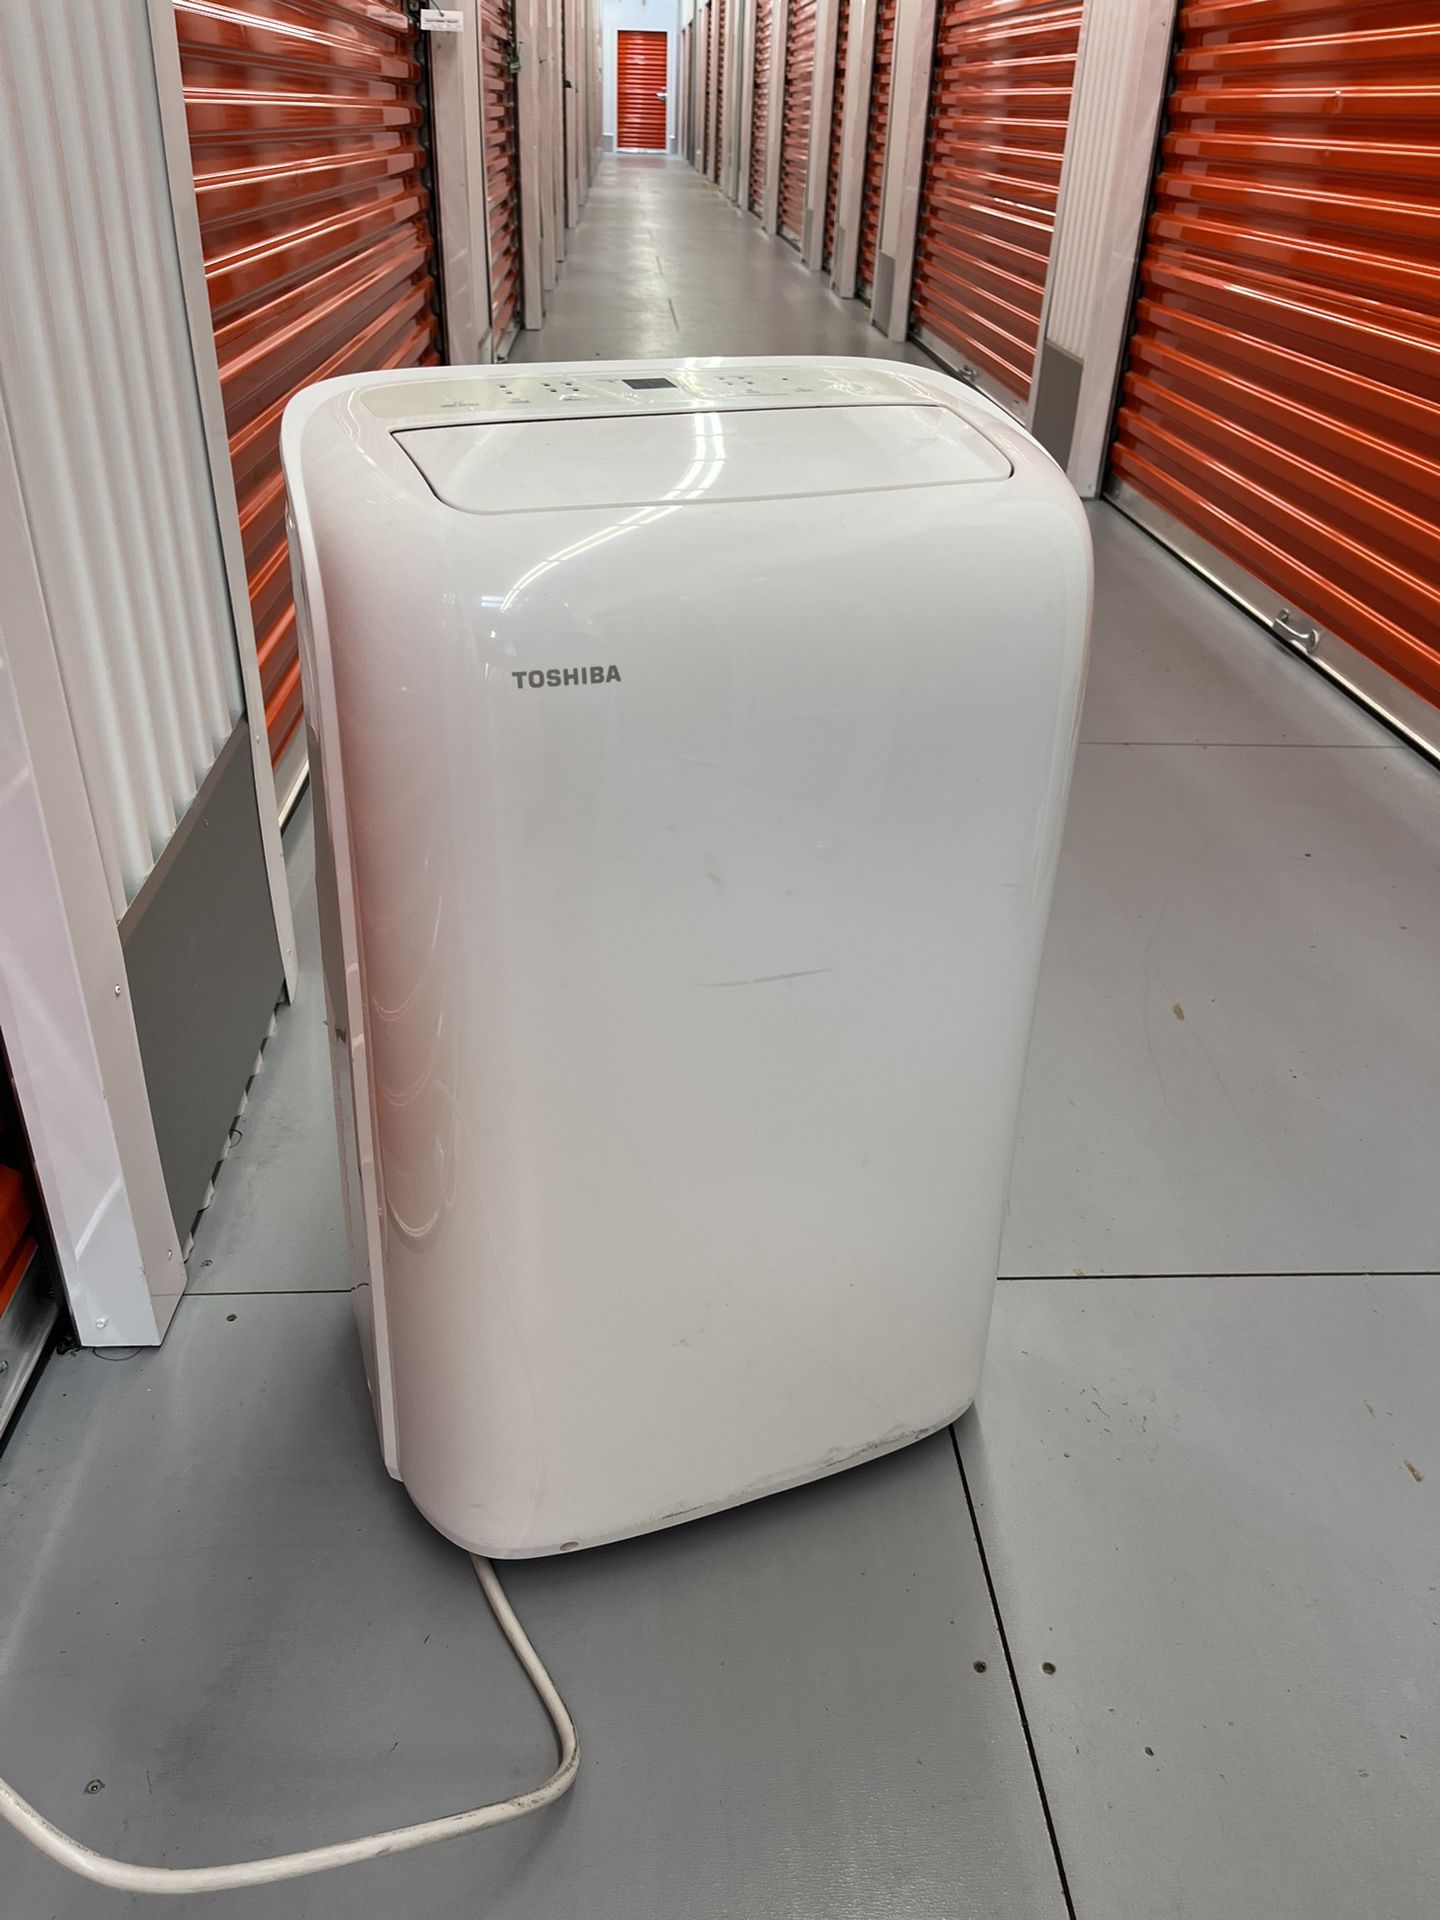 OBO: Toshiba Portable AC/ Air conditioner 10000 Btu, Includes All Parts, 3 Years Old